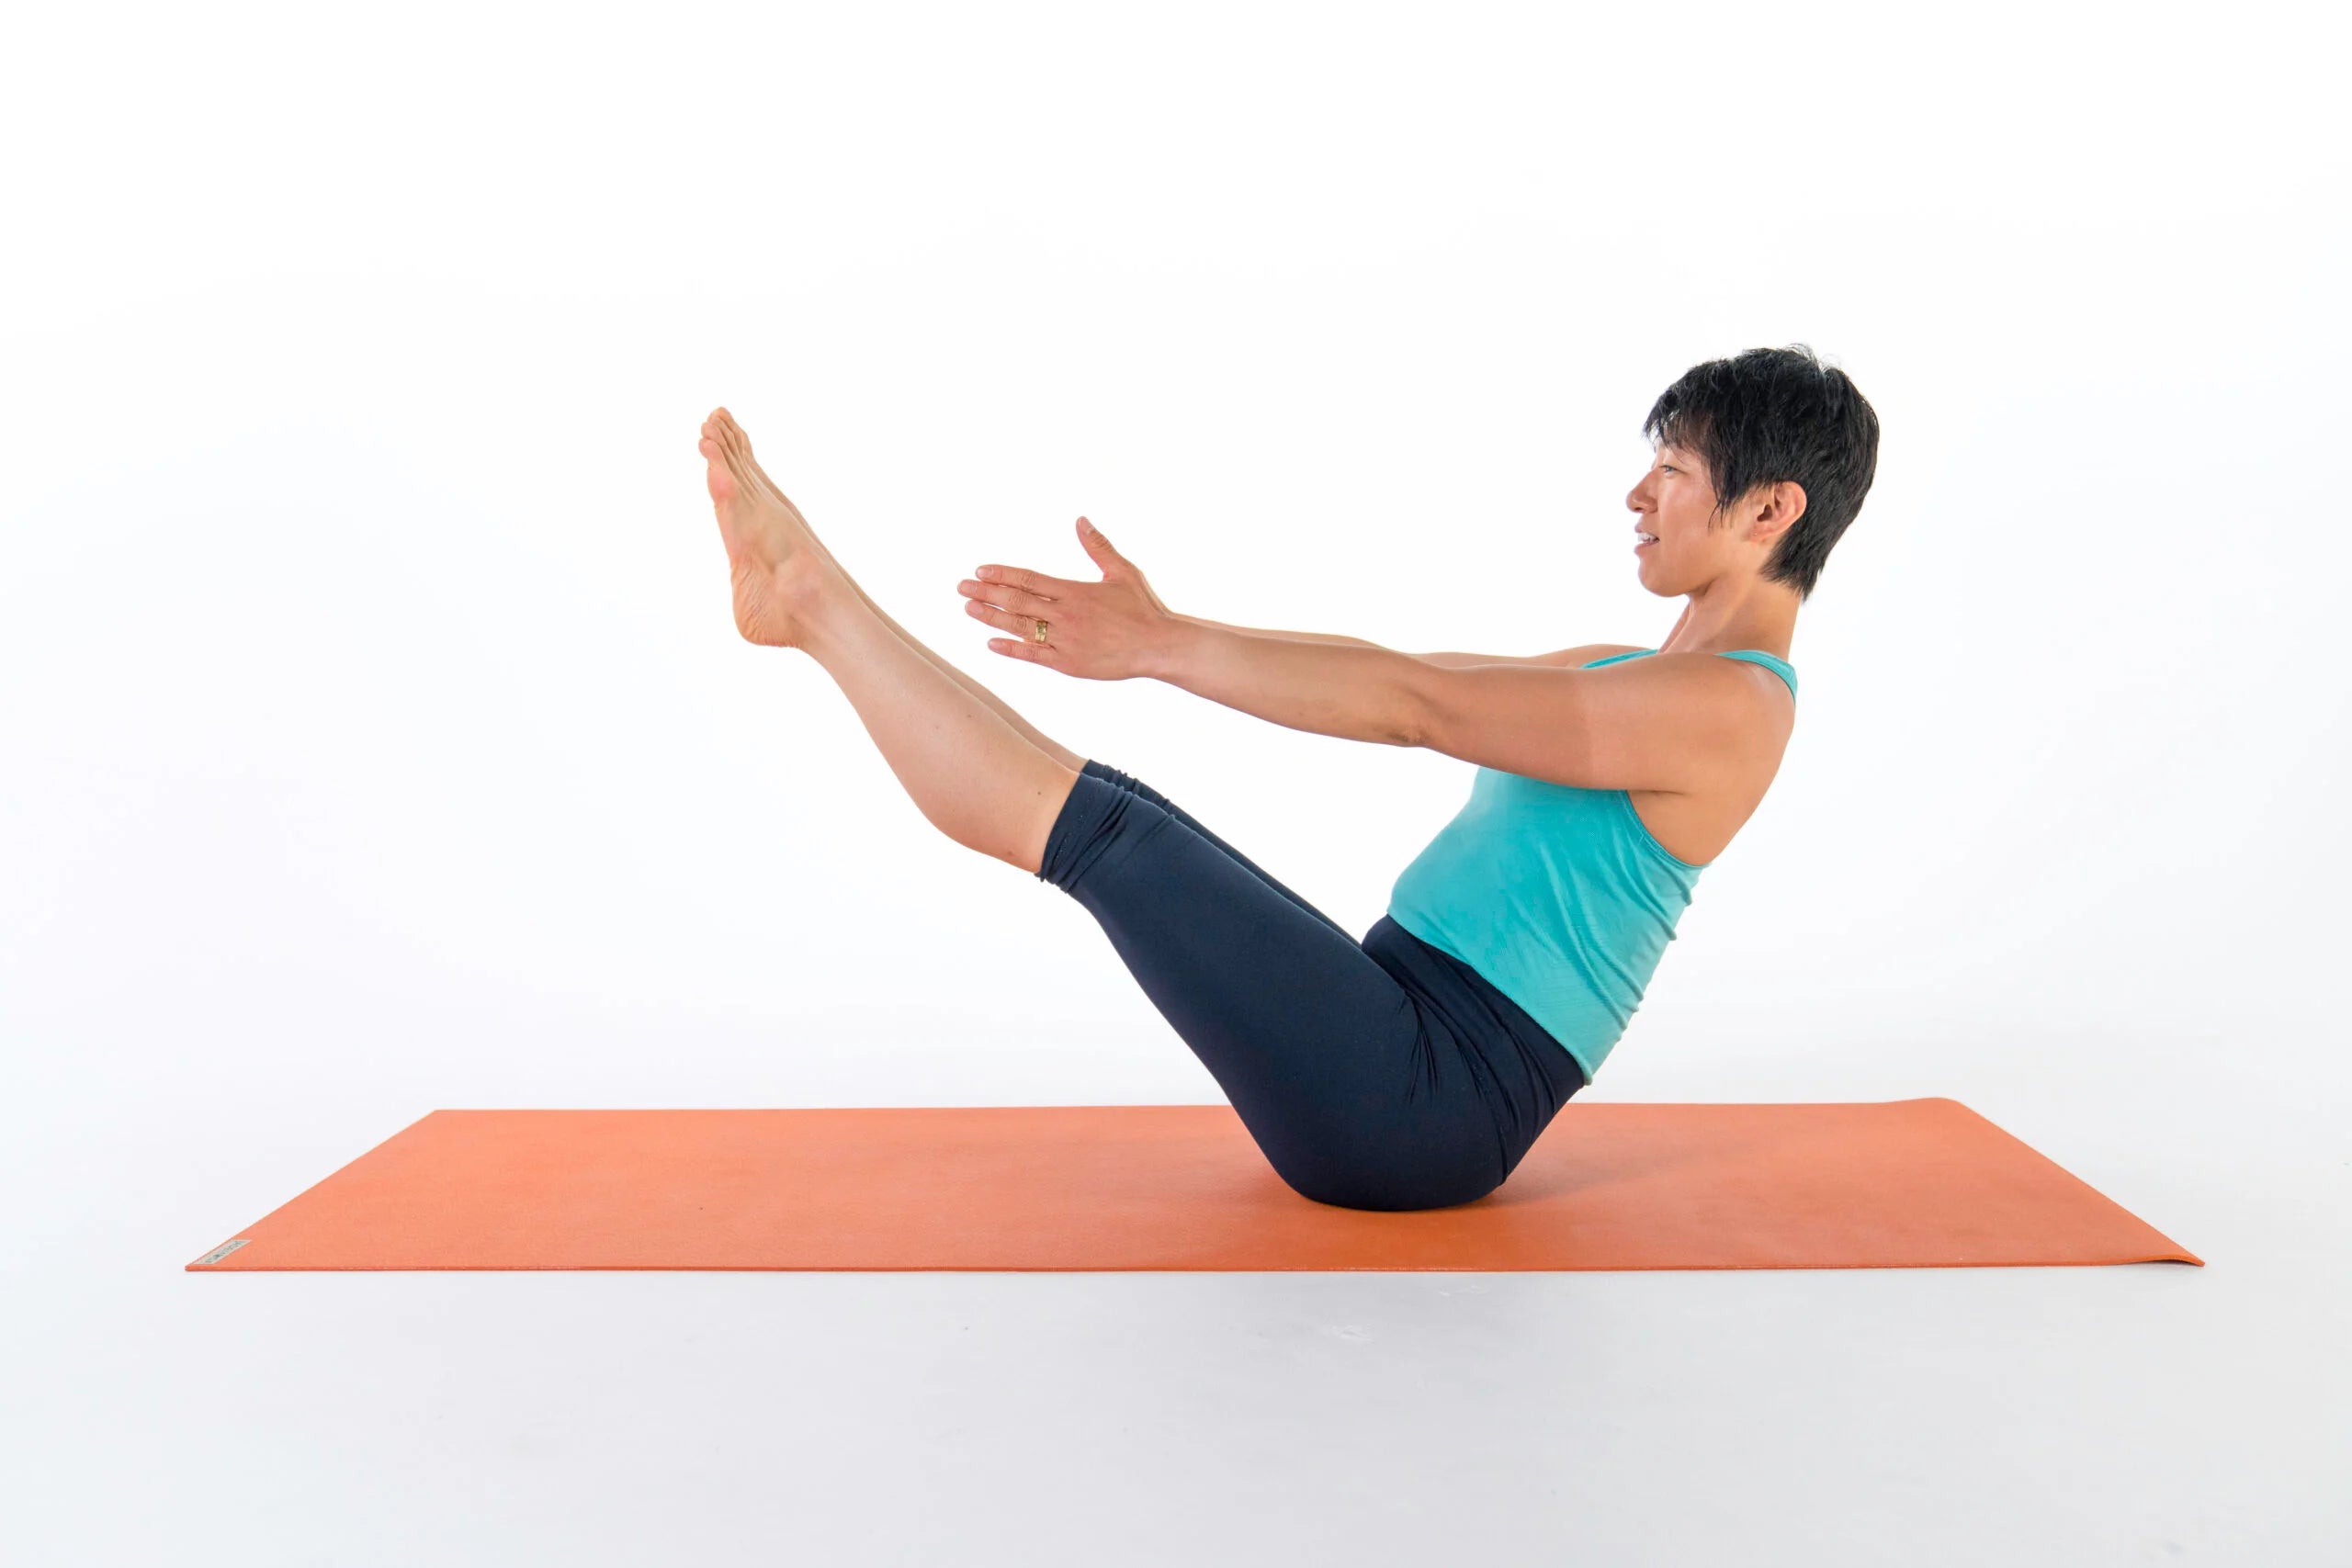 Yoga Poses for Period Cramps: 4 Restorative Poses To Try